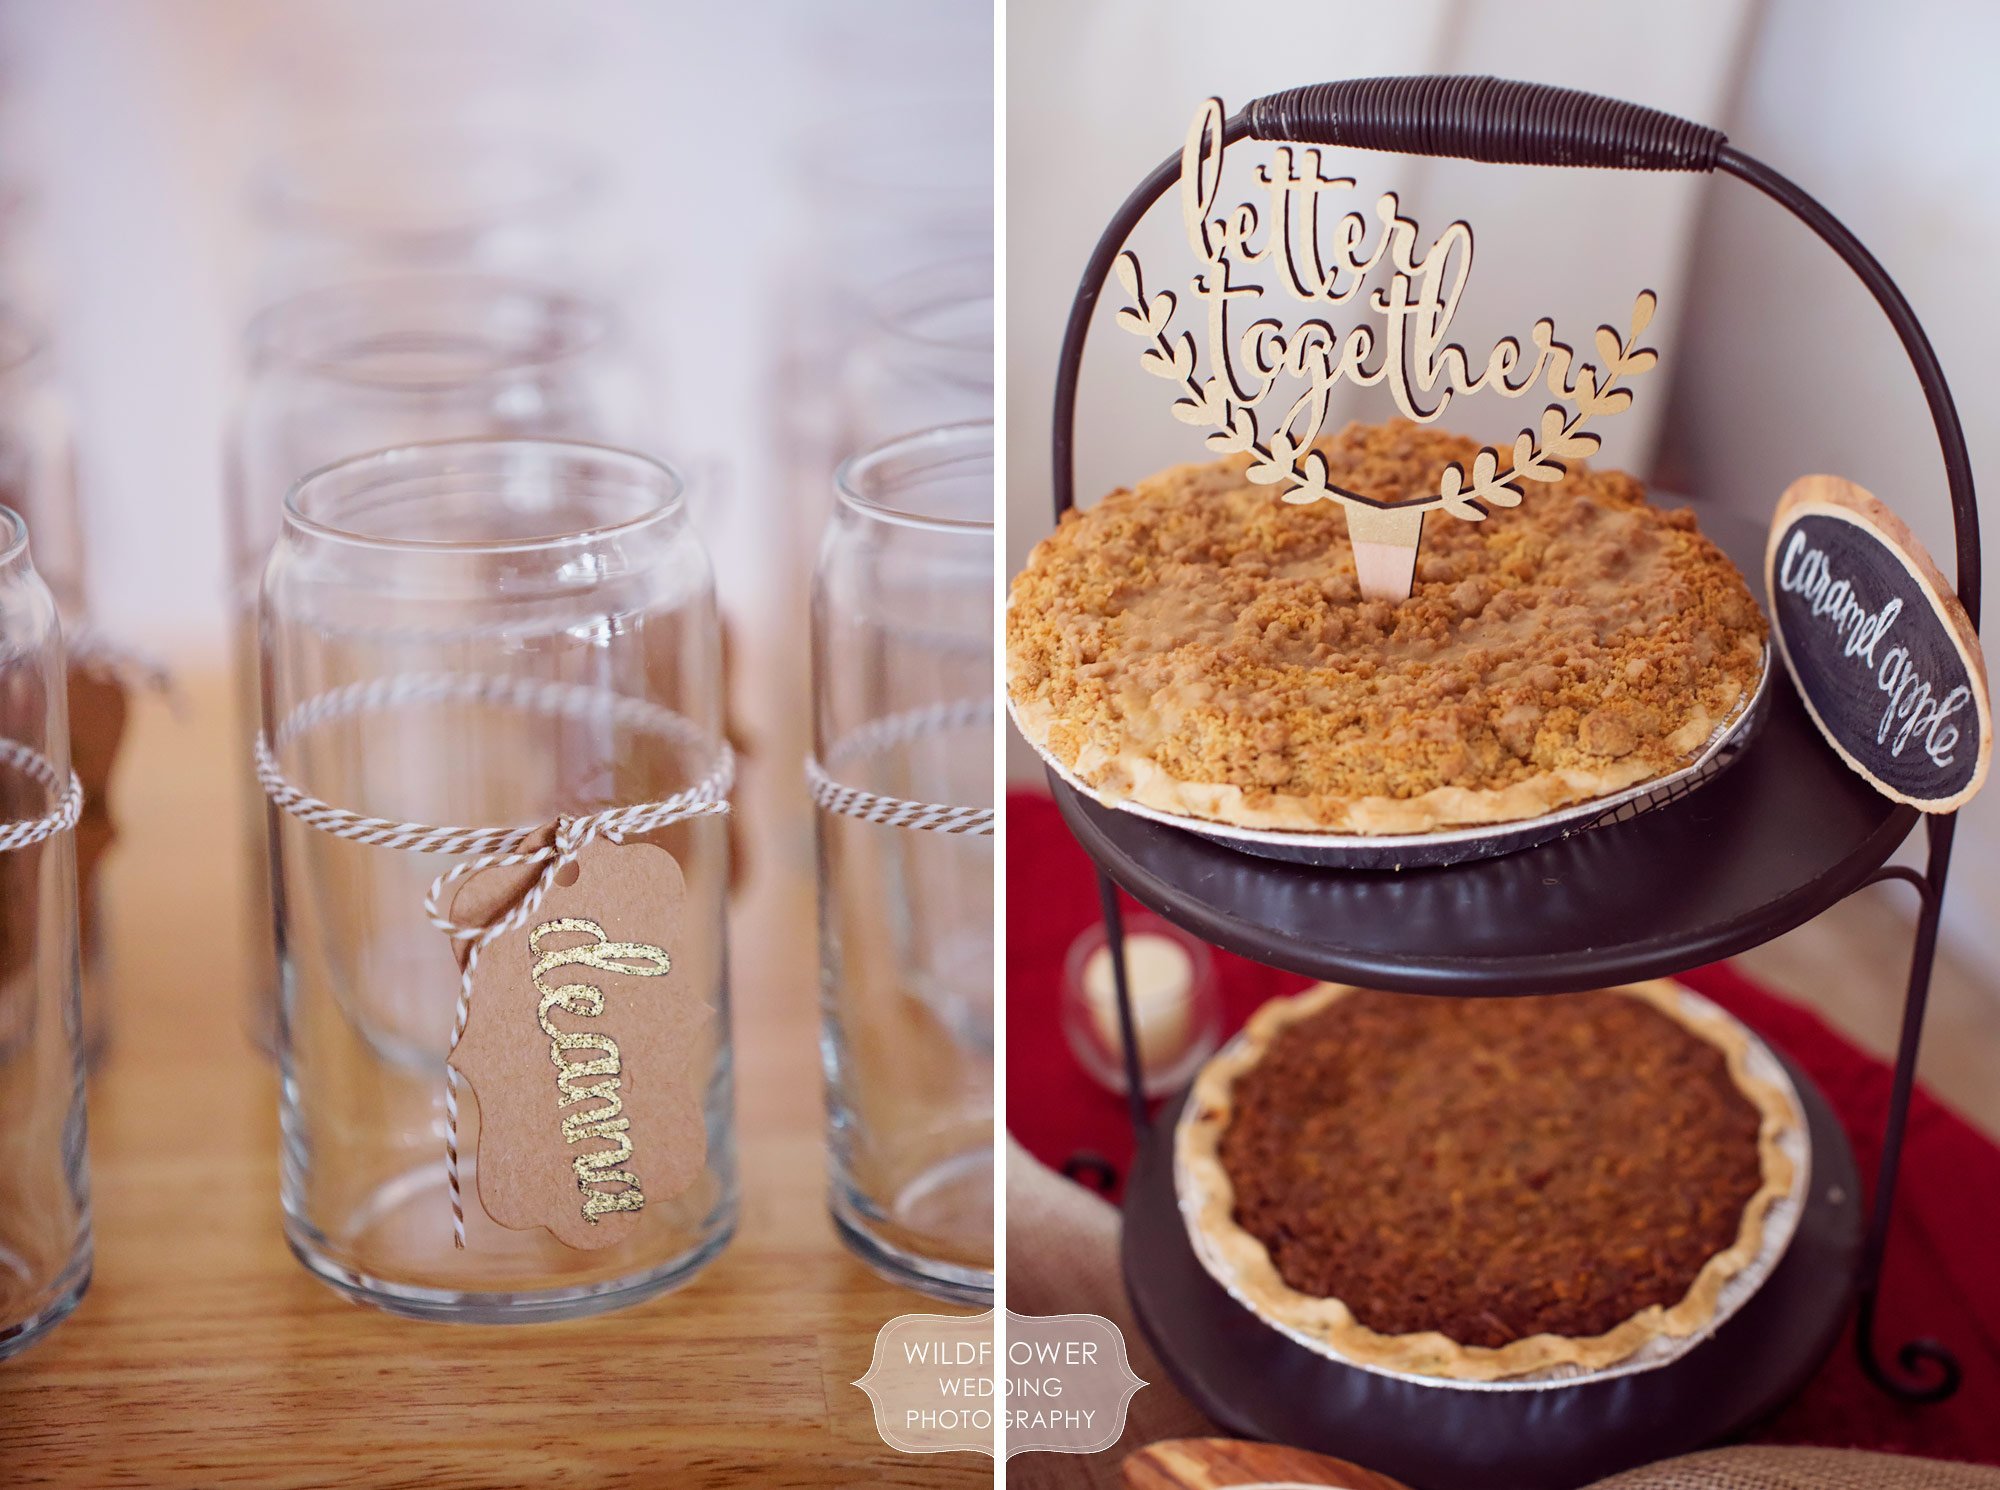 Personalized glasses and a modern wood cut cake topper were on display at this winter wedding in MO.